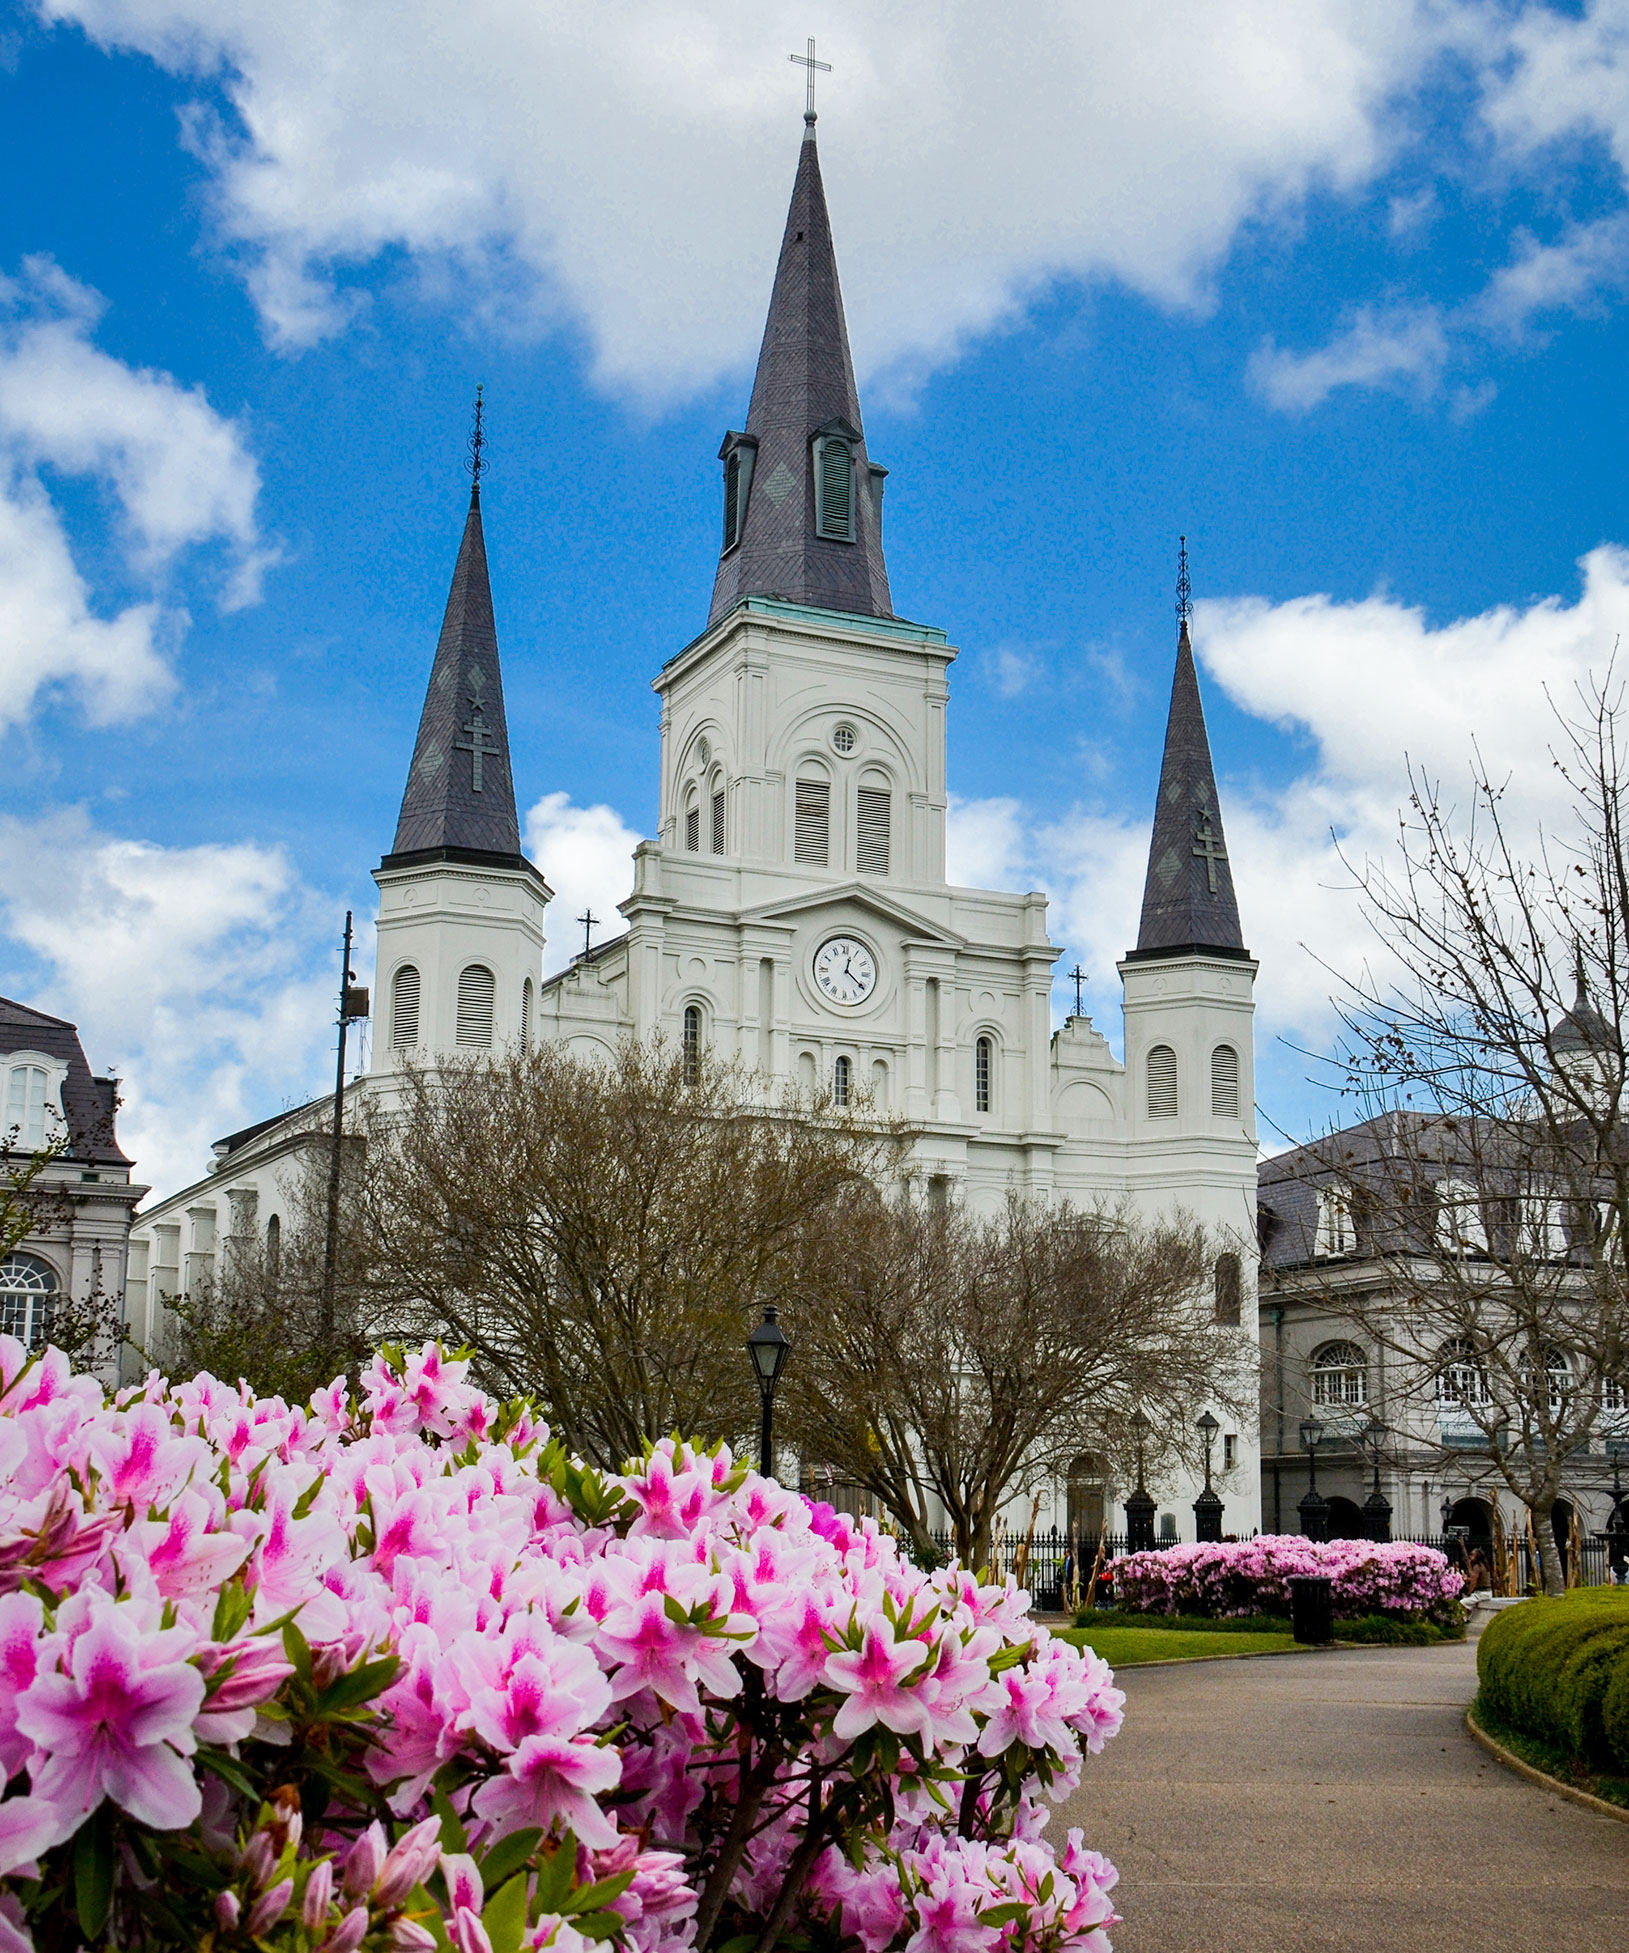 French Quarter Hotels: Where to Stay in New Orleans